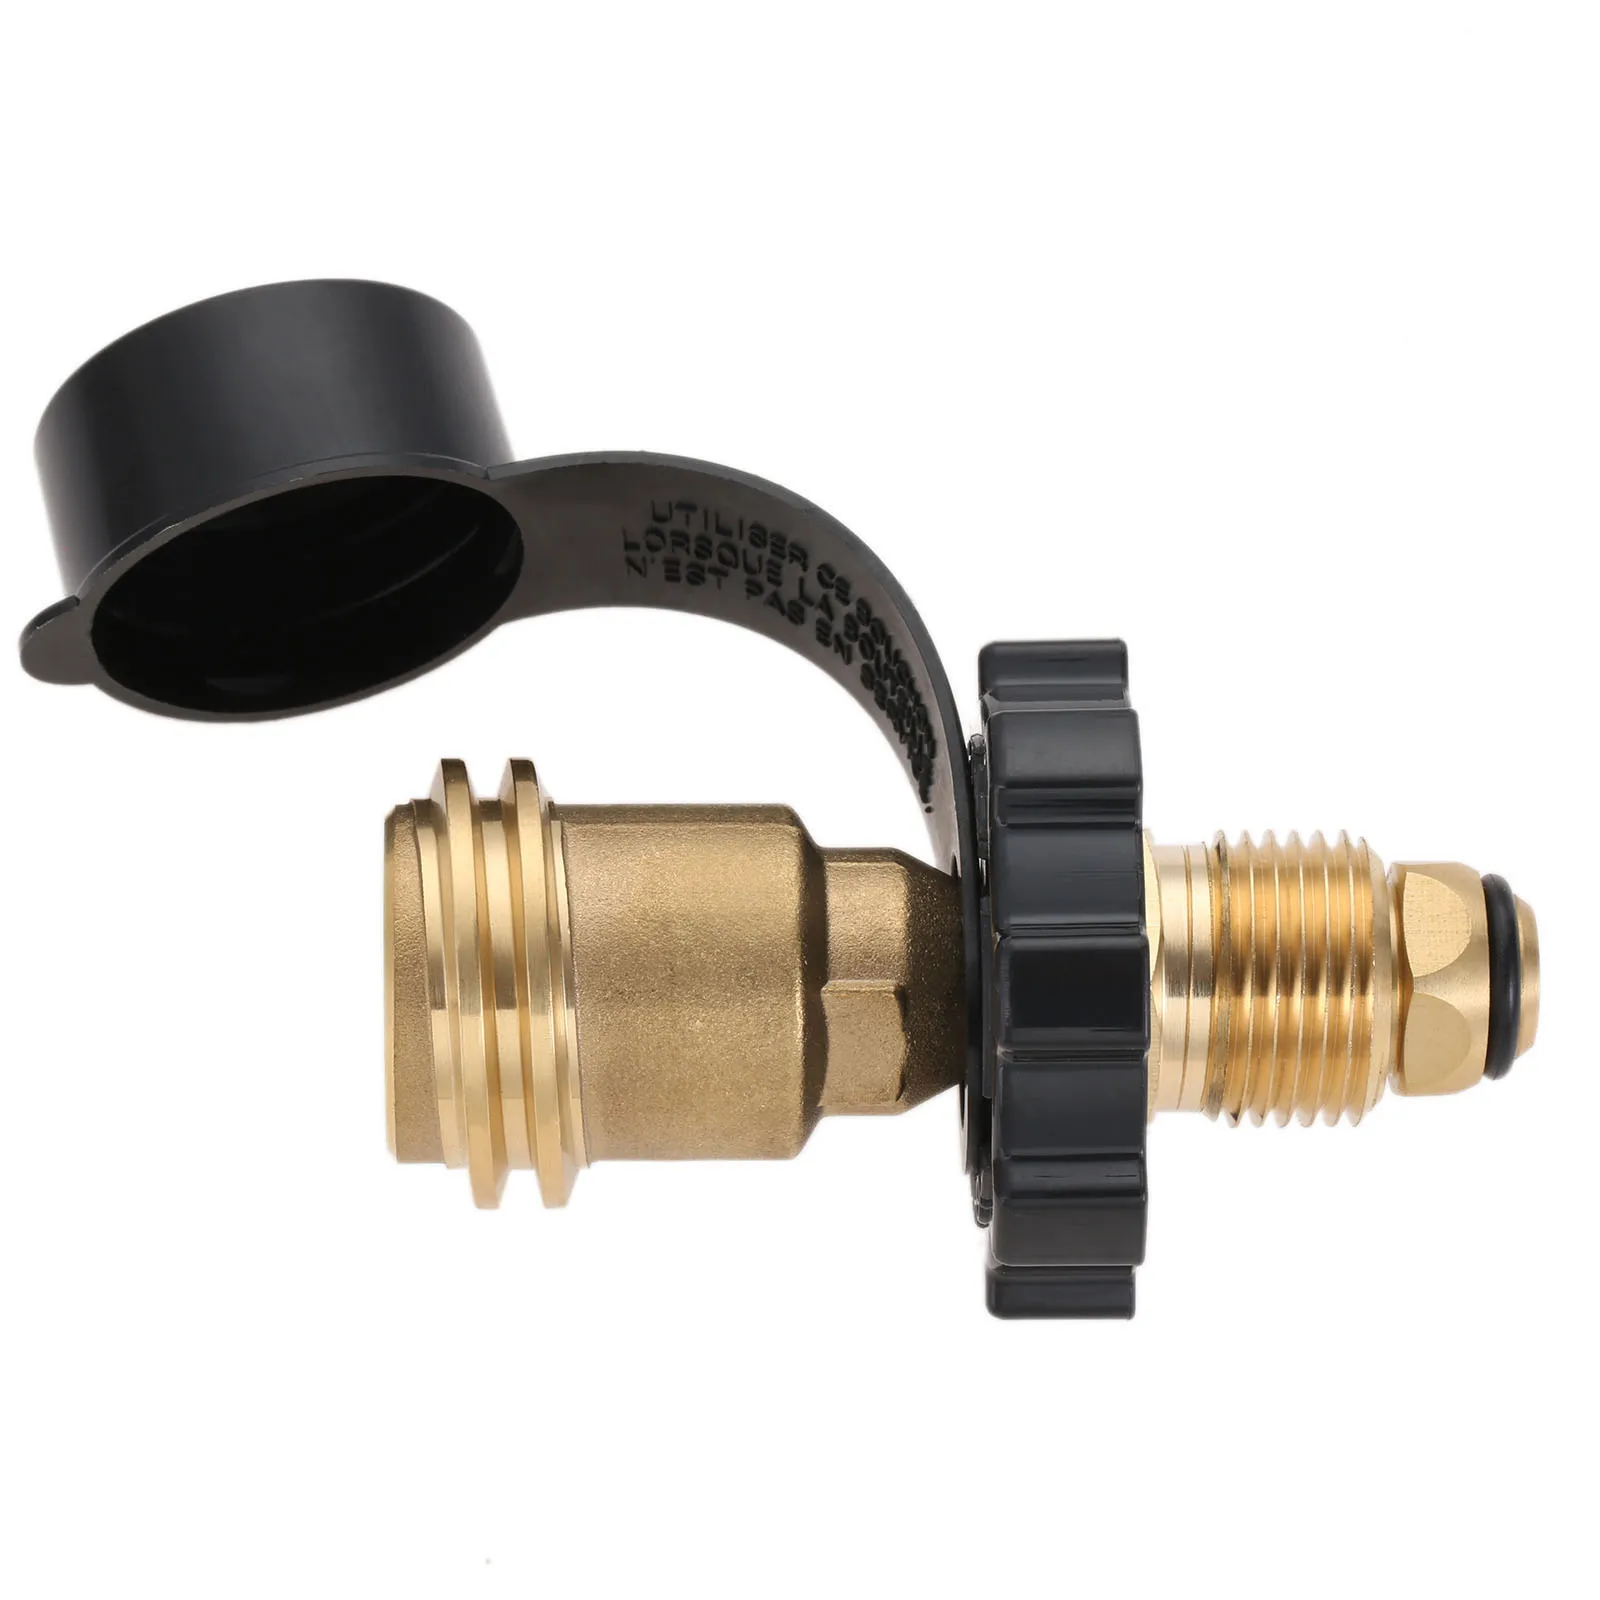 1pc Brass Propane Tank Adapter POL LP Tank Connection To QCC1/Type1 Connection For Hoses And Regulators BBQ Camping Stoves Grill